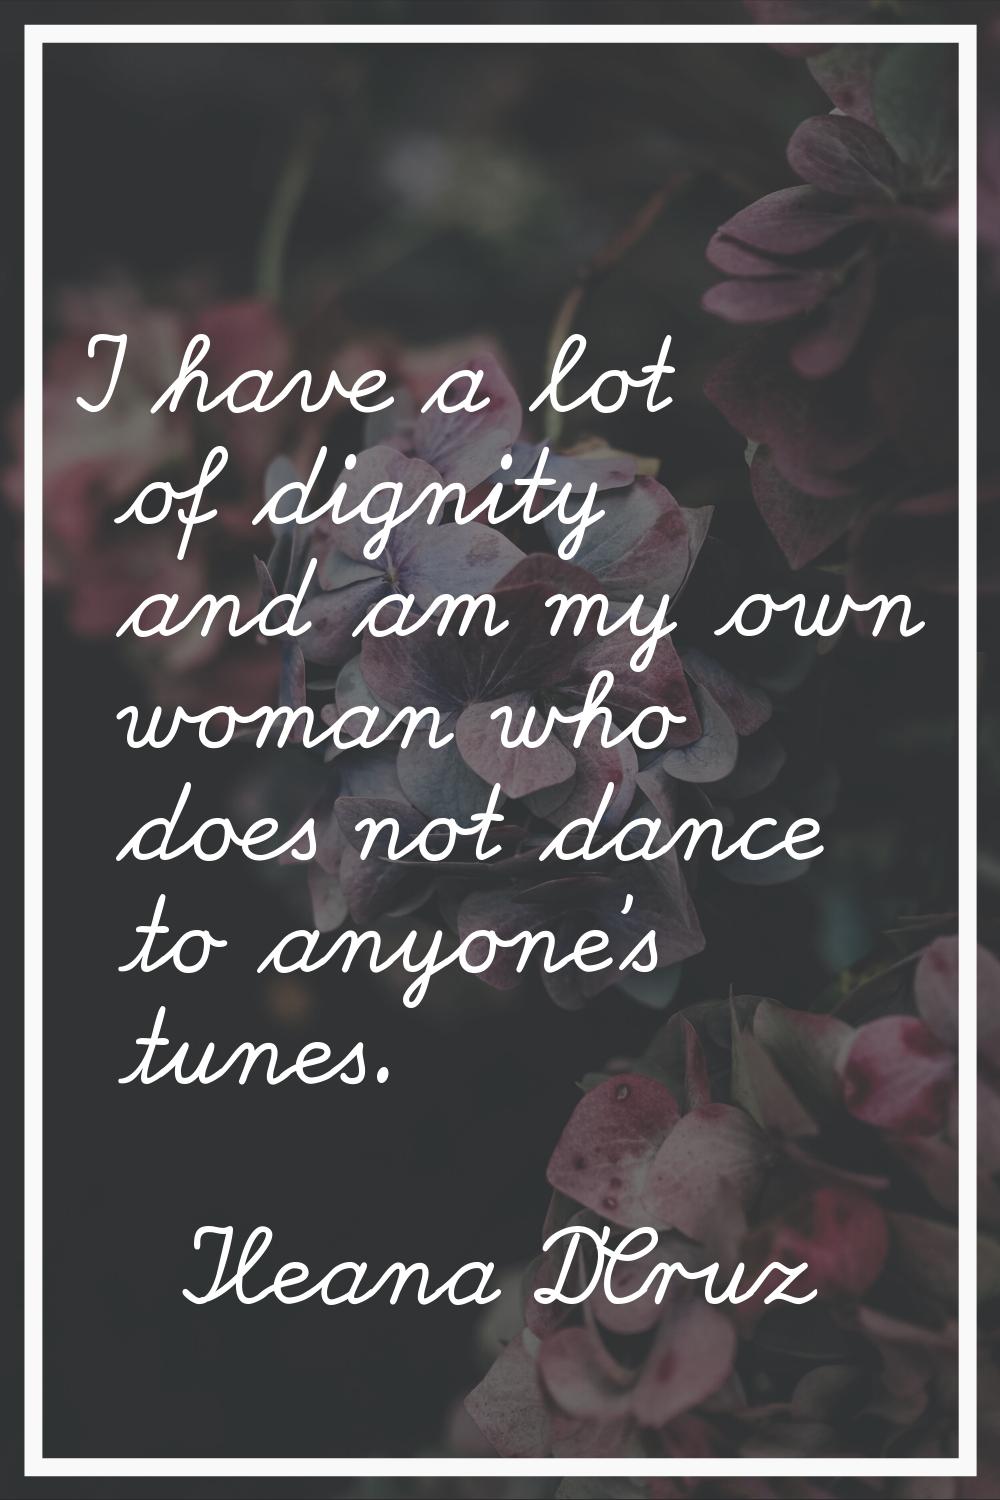 I have a lot of dignity and am my own woman who does not dance to anyone's tunes.